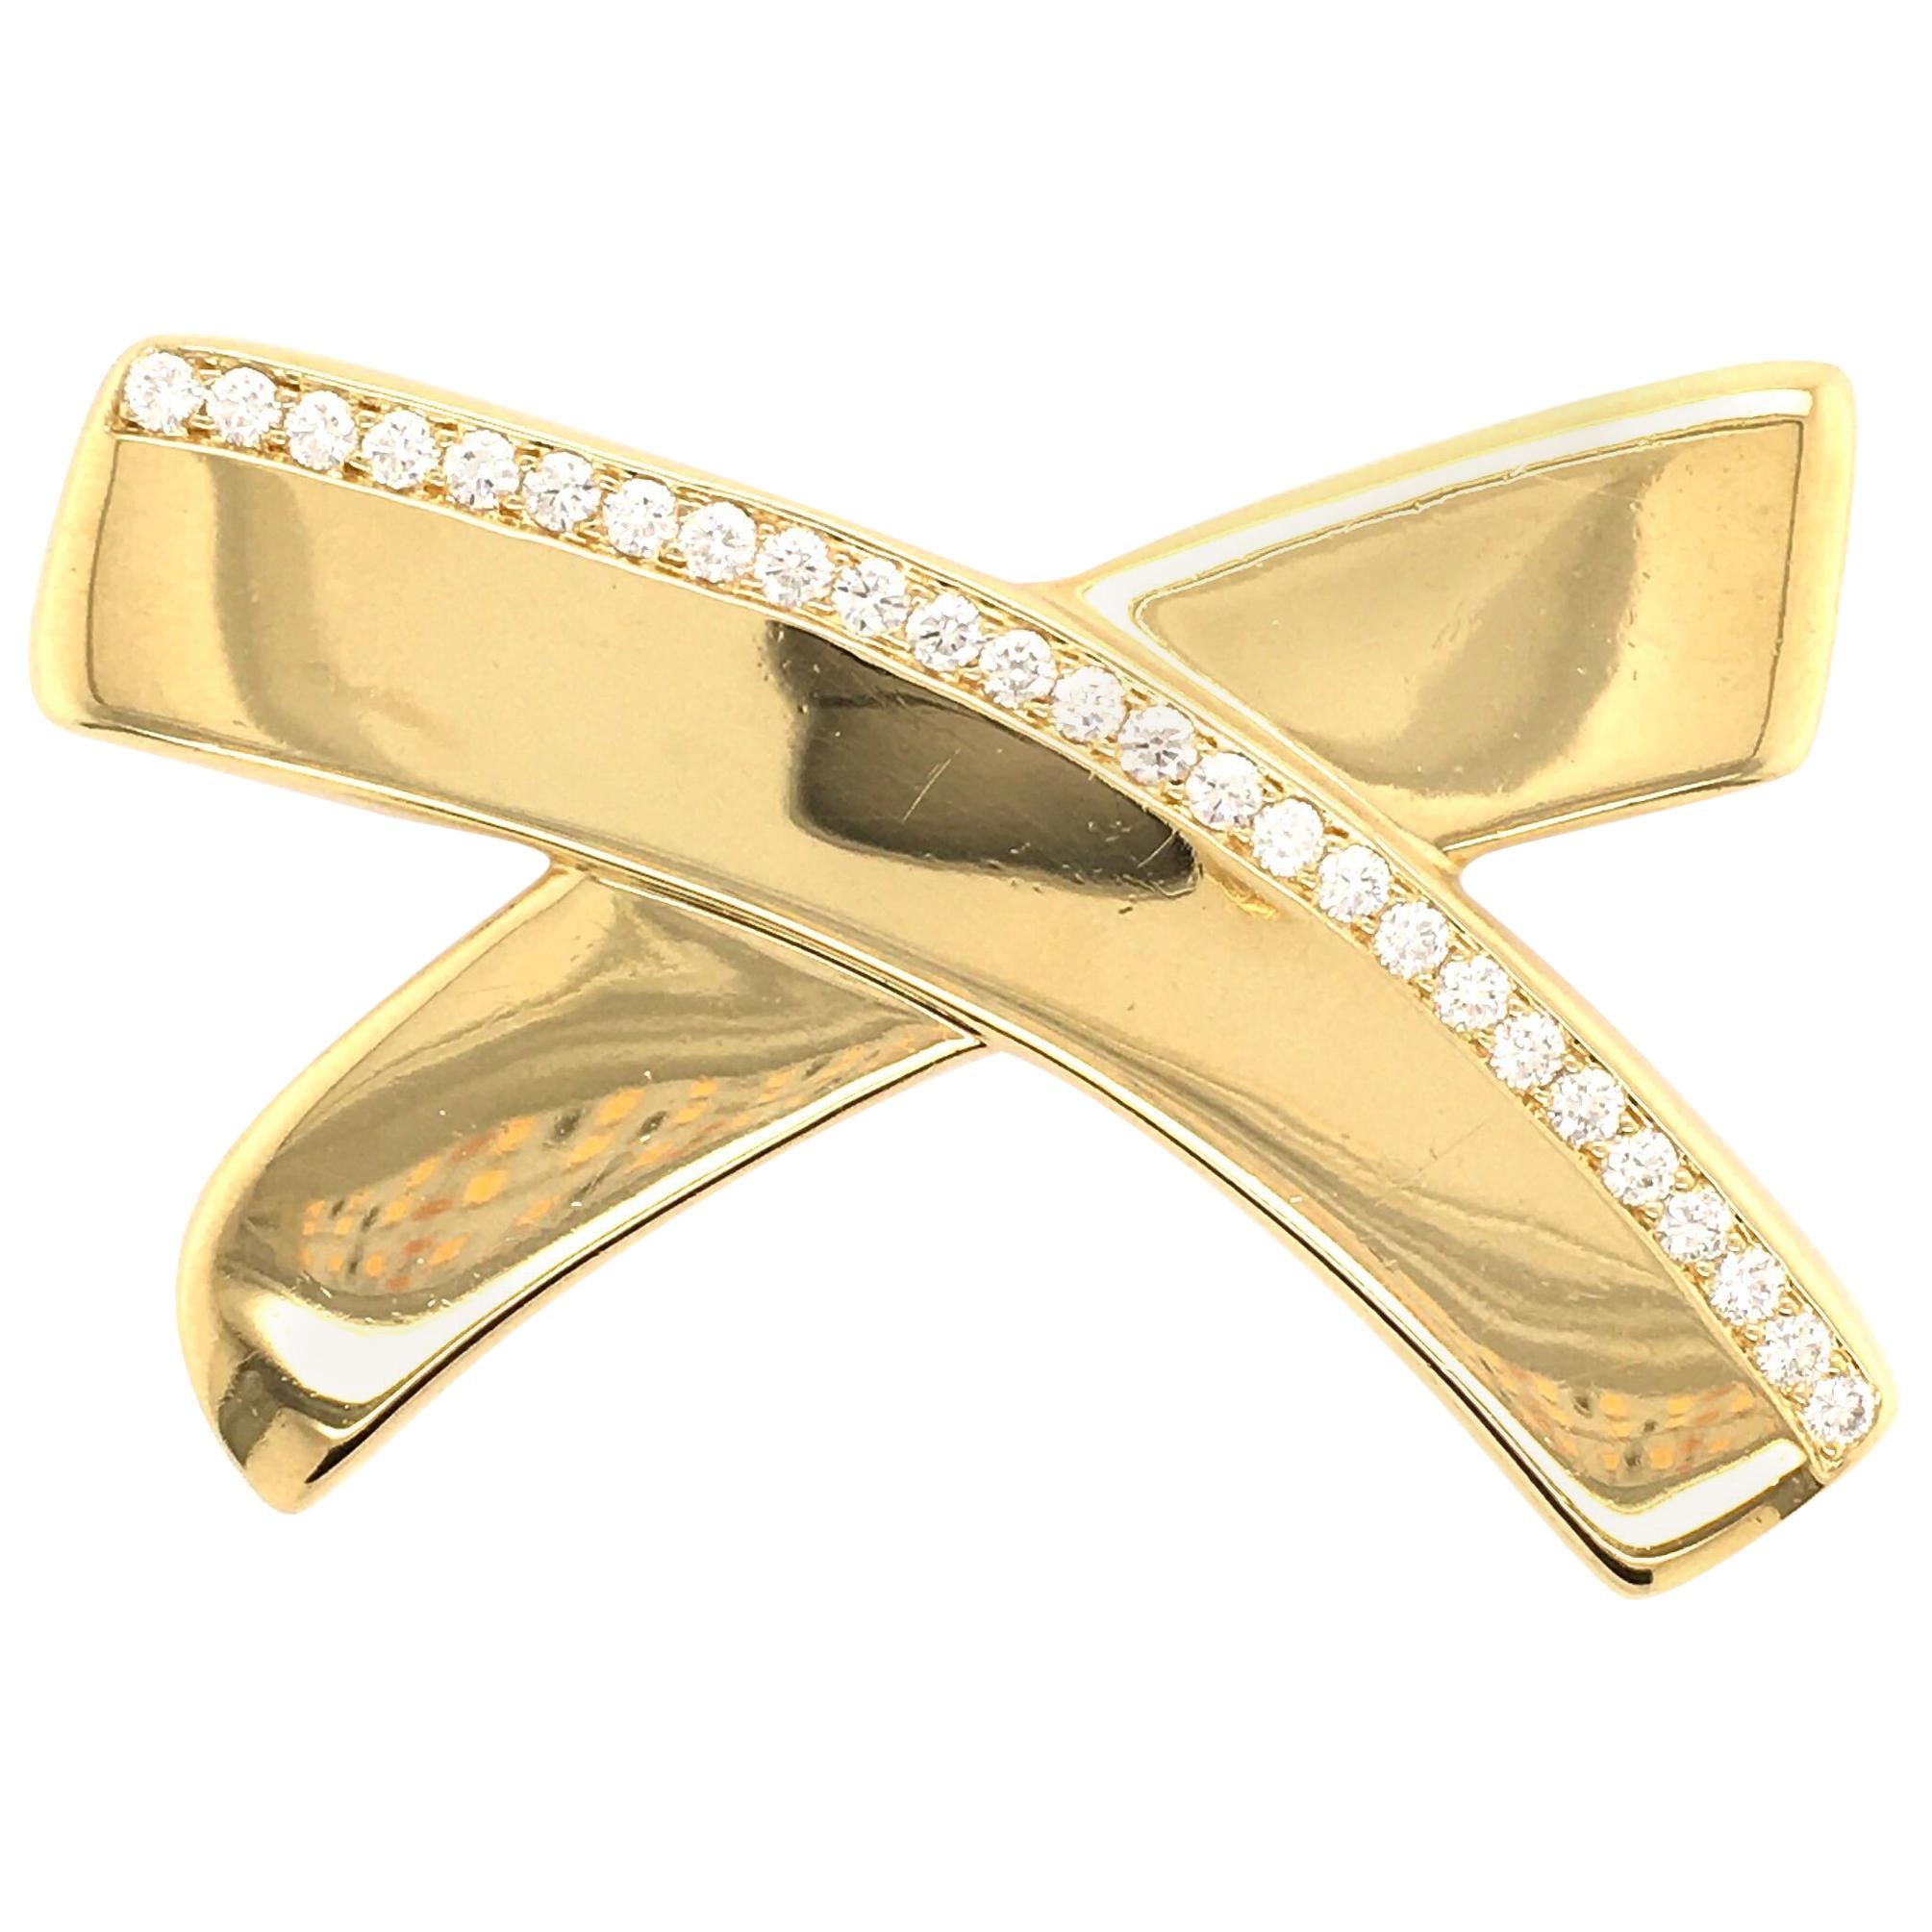 Paloma Picasso for Tiffany & Co., Gold and Diamond X Motif Brooch